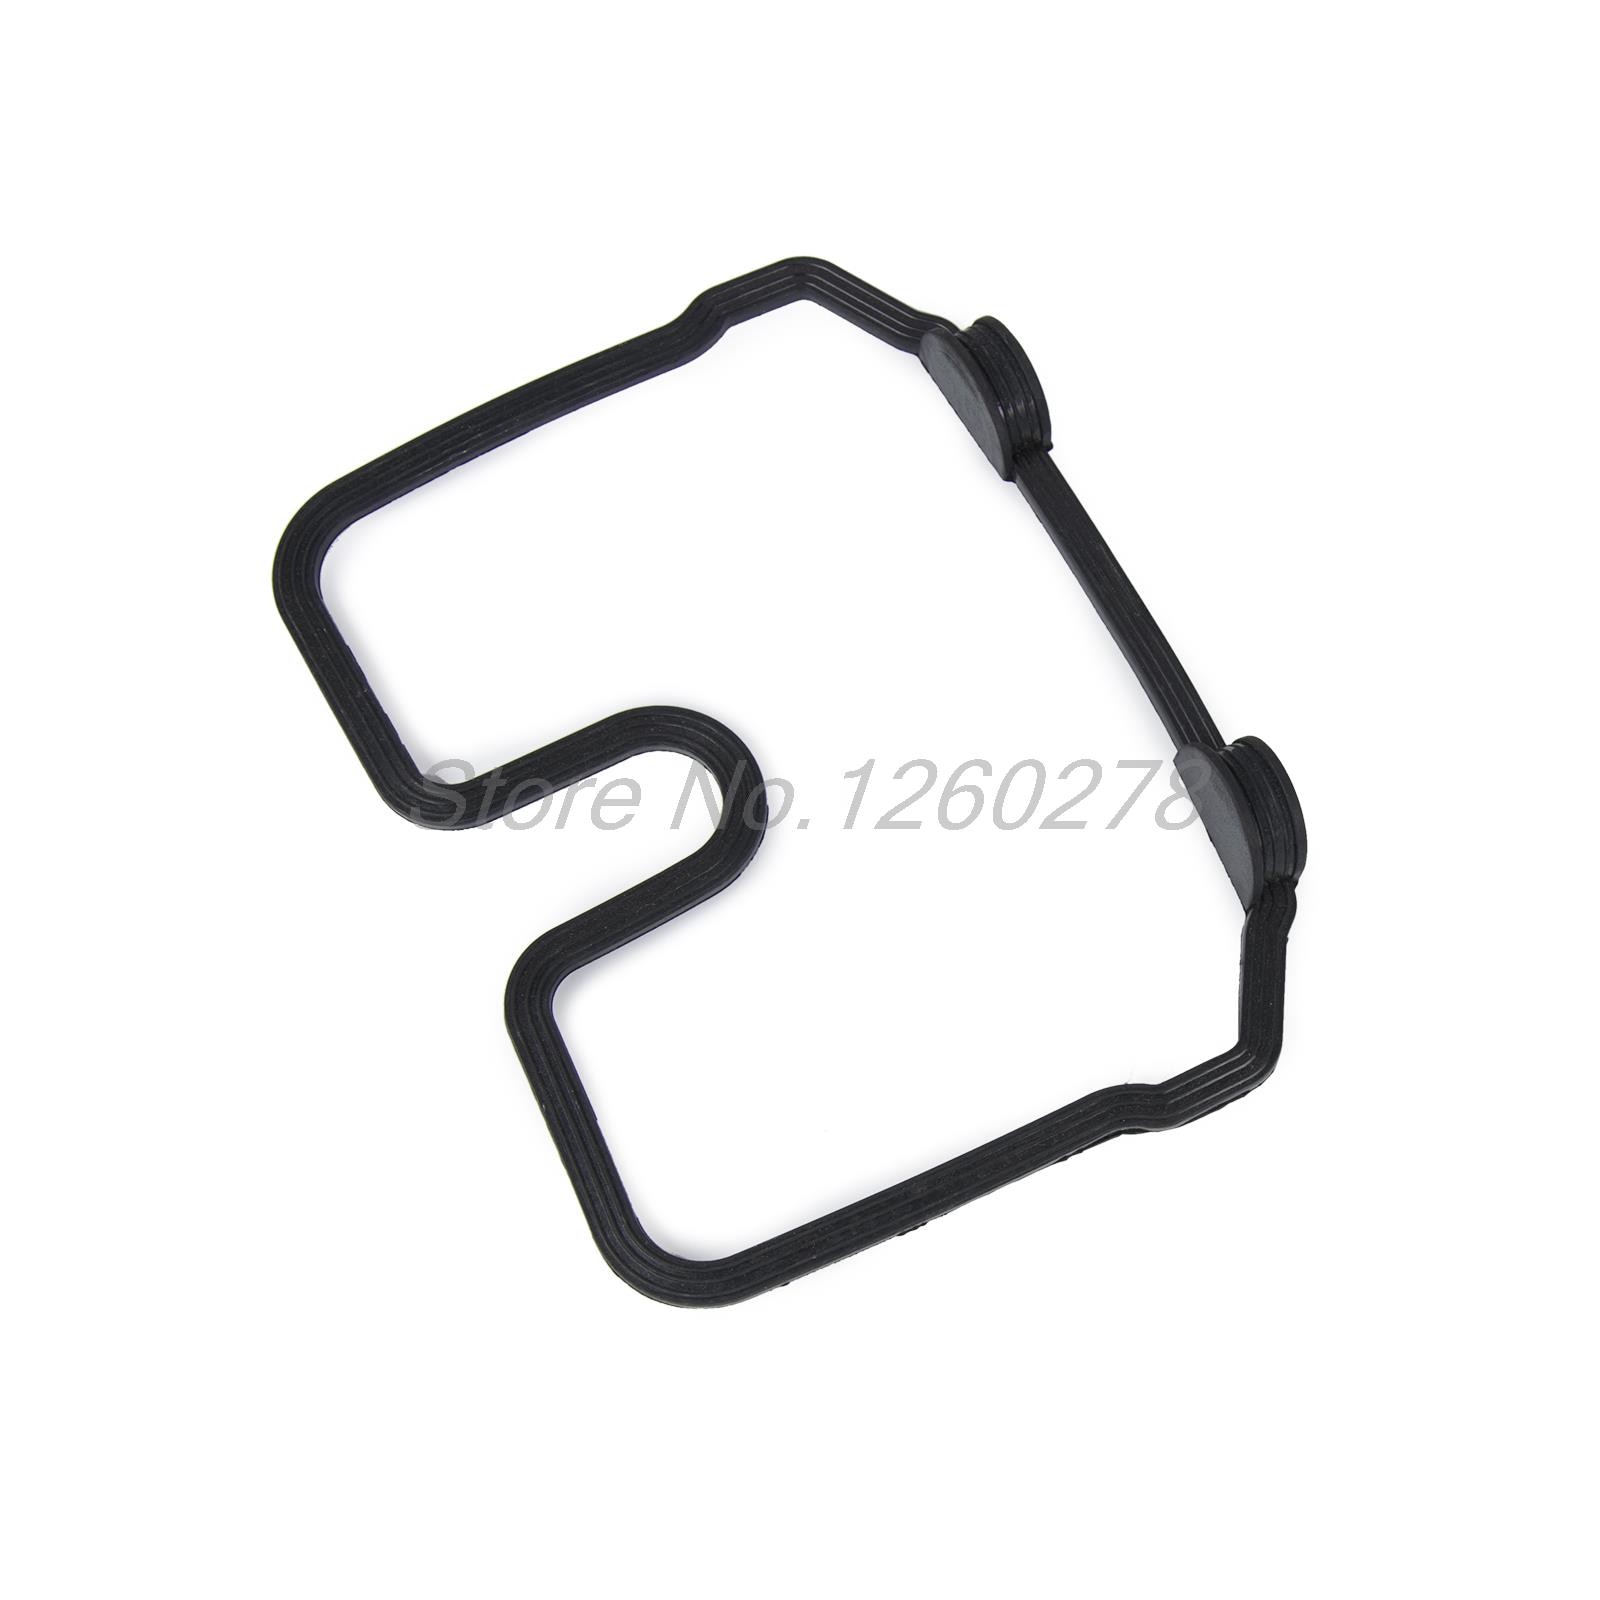 Motorcycle Parts Cylinder Head Cover Gasket for Honda NX250 AX-1 1988 - 1994 1989 1990 1991 1992 1993 AX1 NX 250